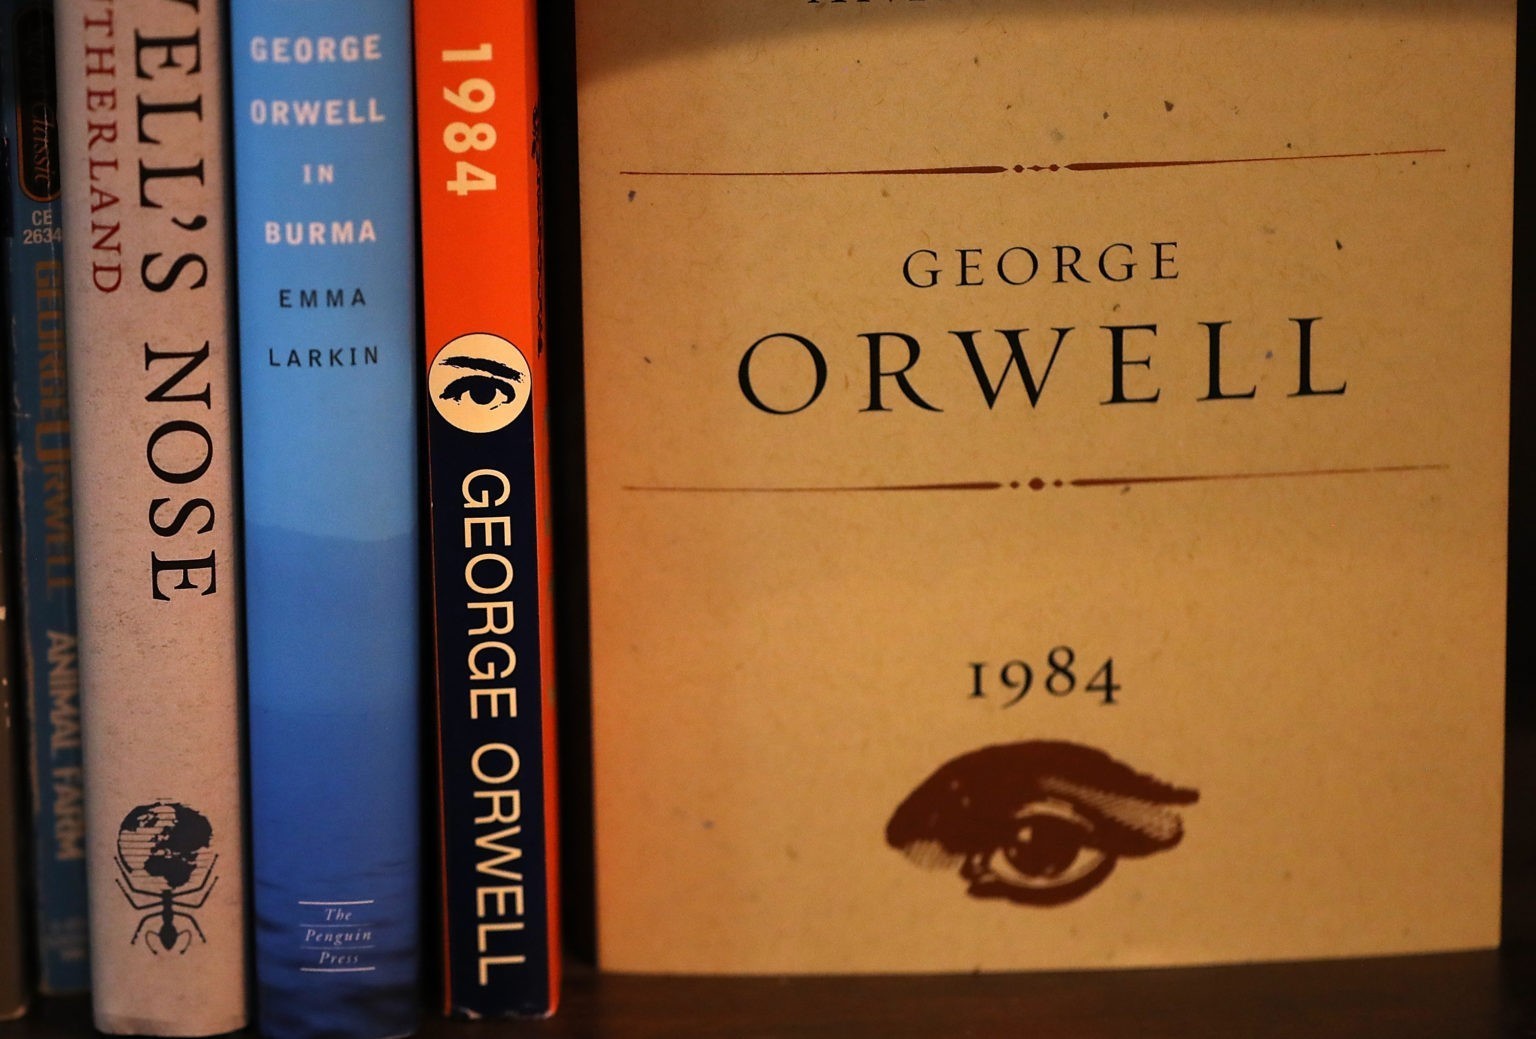 1984 and animal farm book and cassette george orwell